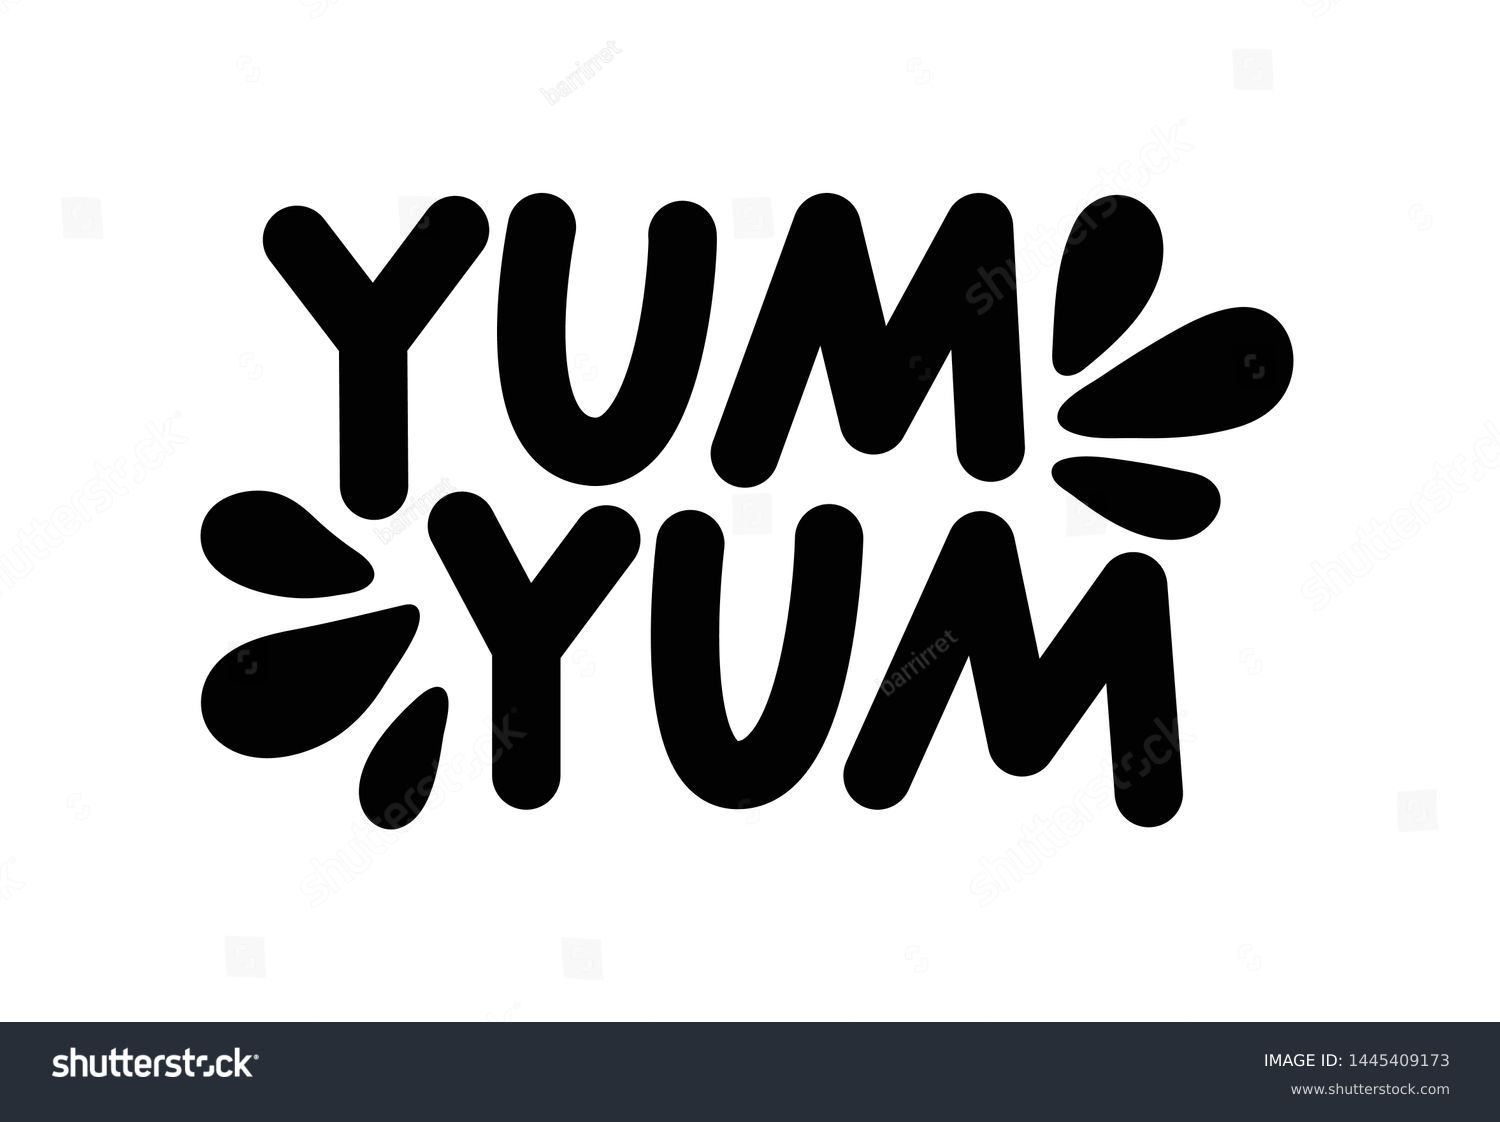 Yum Yum text. Only one single word. Printable graphic tee. Design doodle for print. Vector illustration. Colorful. Cartoon hand drawn calligraphy style. Black and white #1445409173